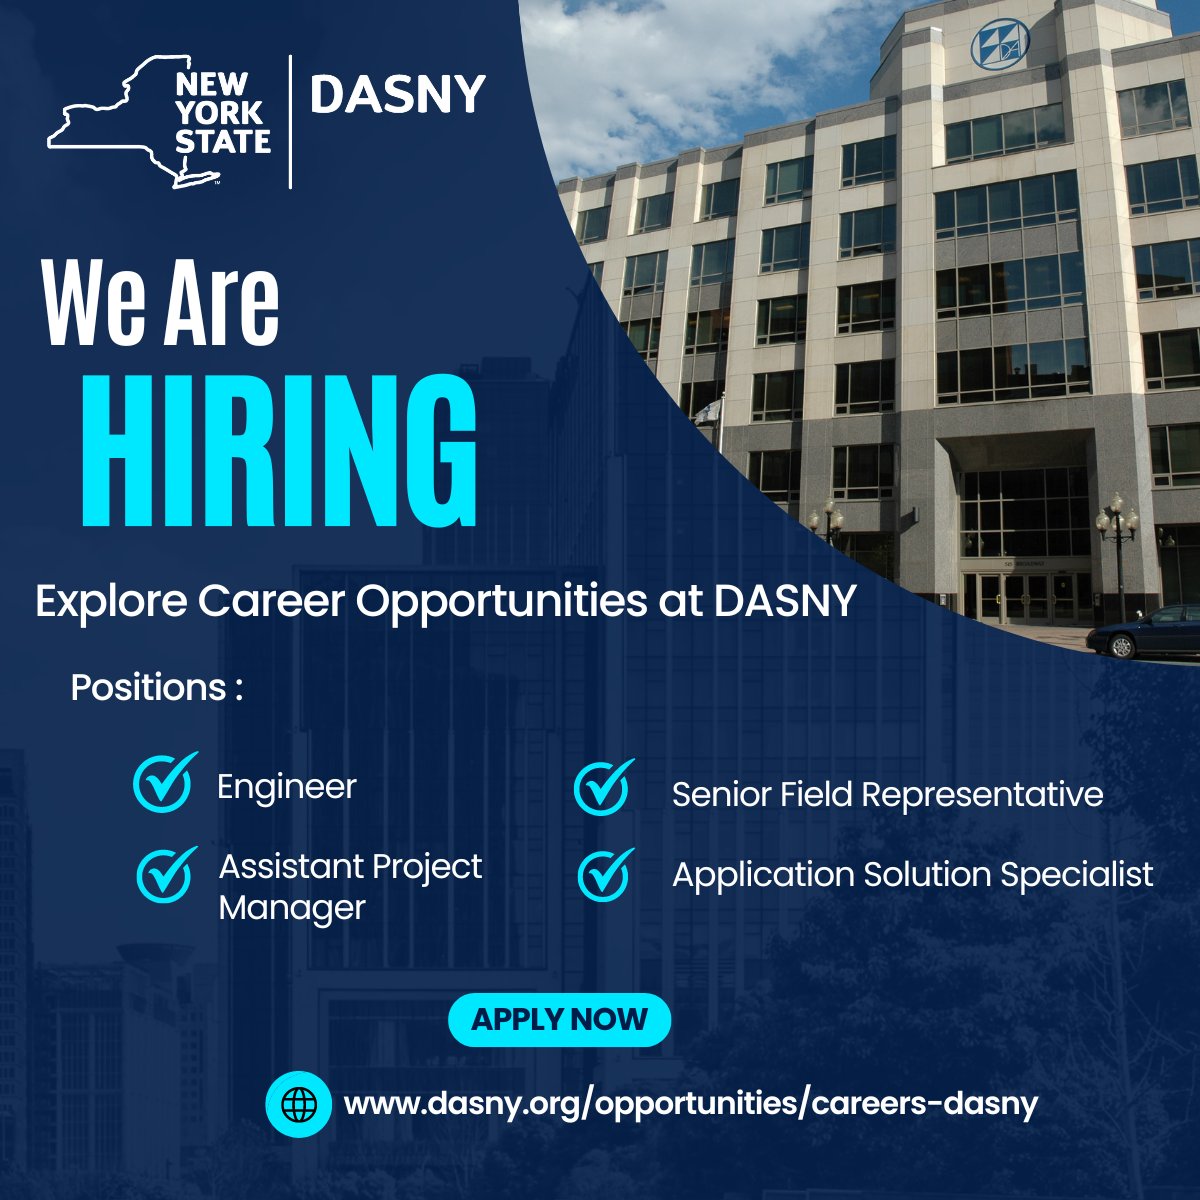 #WeAreHiring! DASNY employs a wide range of skilled professionals to carry out its mission of building New York's Future. Visit our website for career opportunities: bit.ly/3VlkggJ #DASNY #Construction #PublicFinance #Hiring